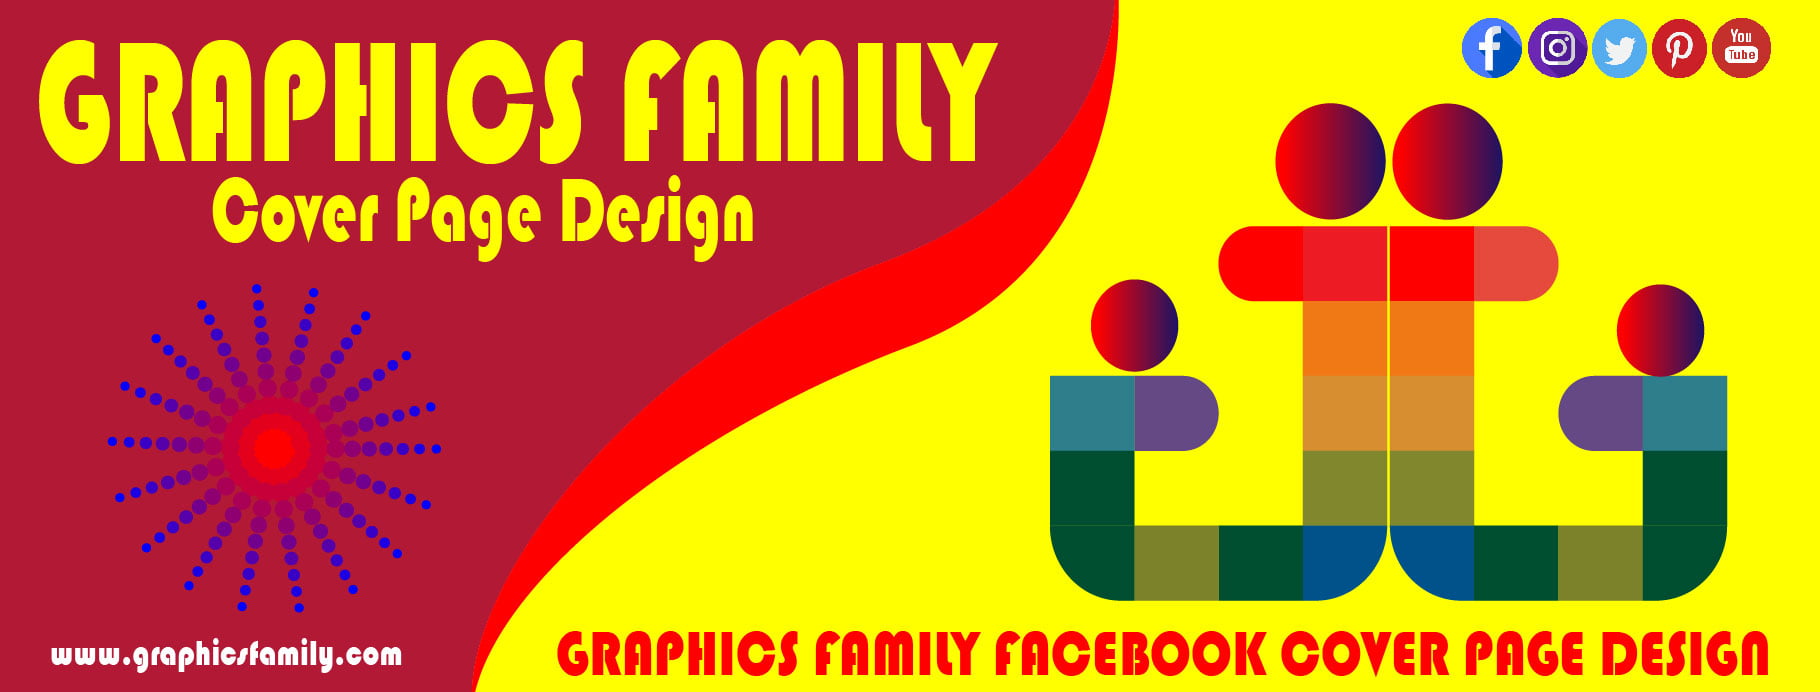 GraphicsFamily Facebook Cover Design